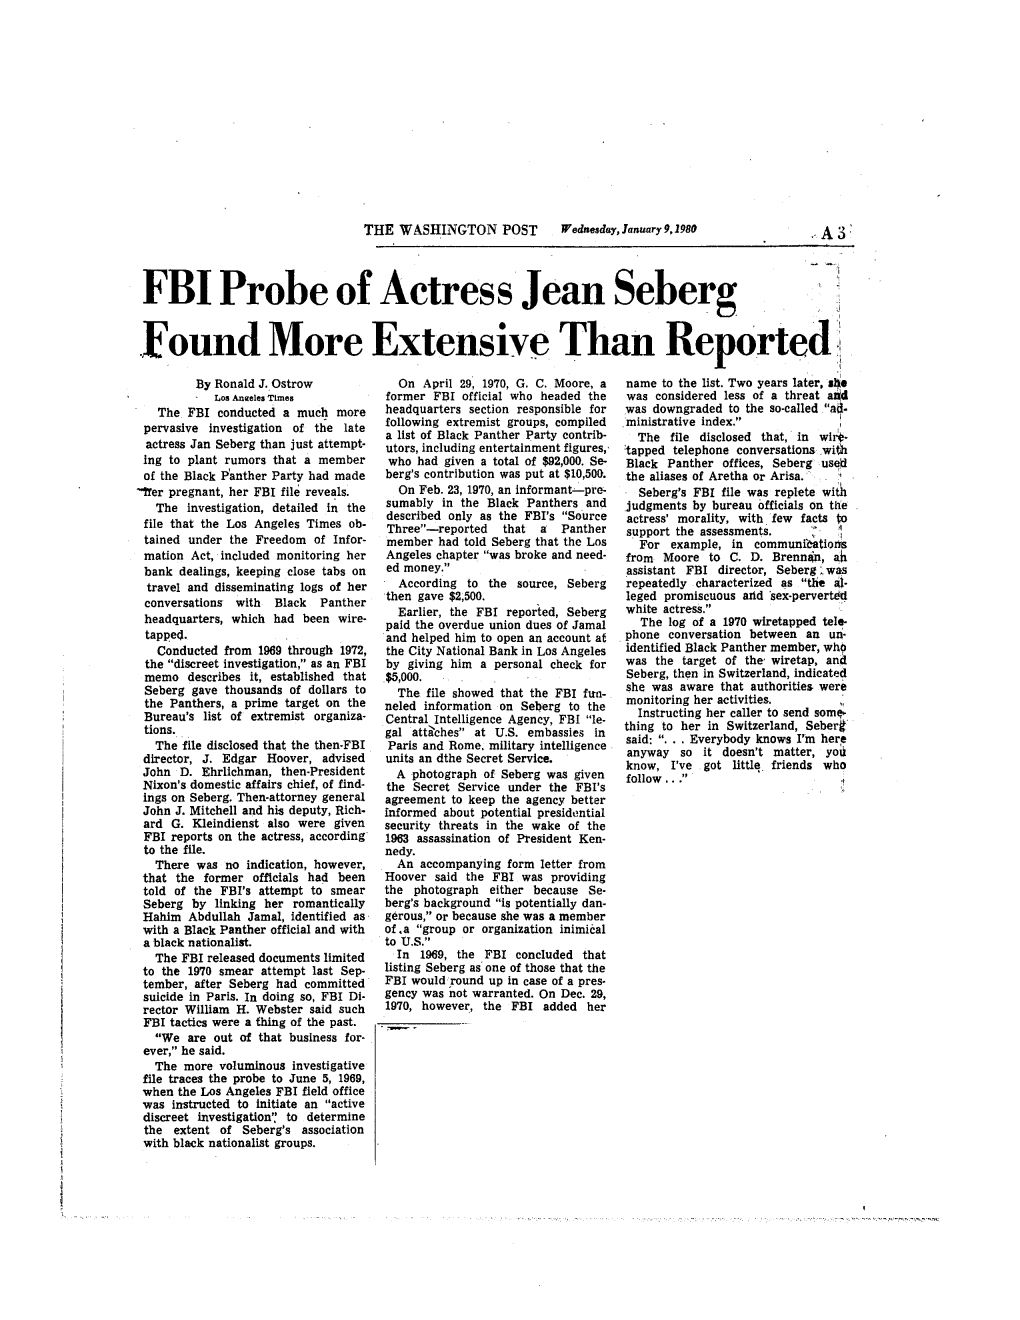 FBI Probe of Actress Jean Seberg Found More Extensive Than Reported by Ronald J